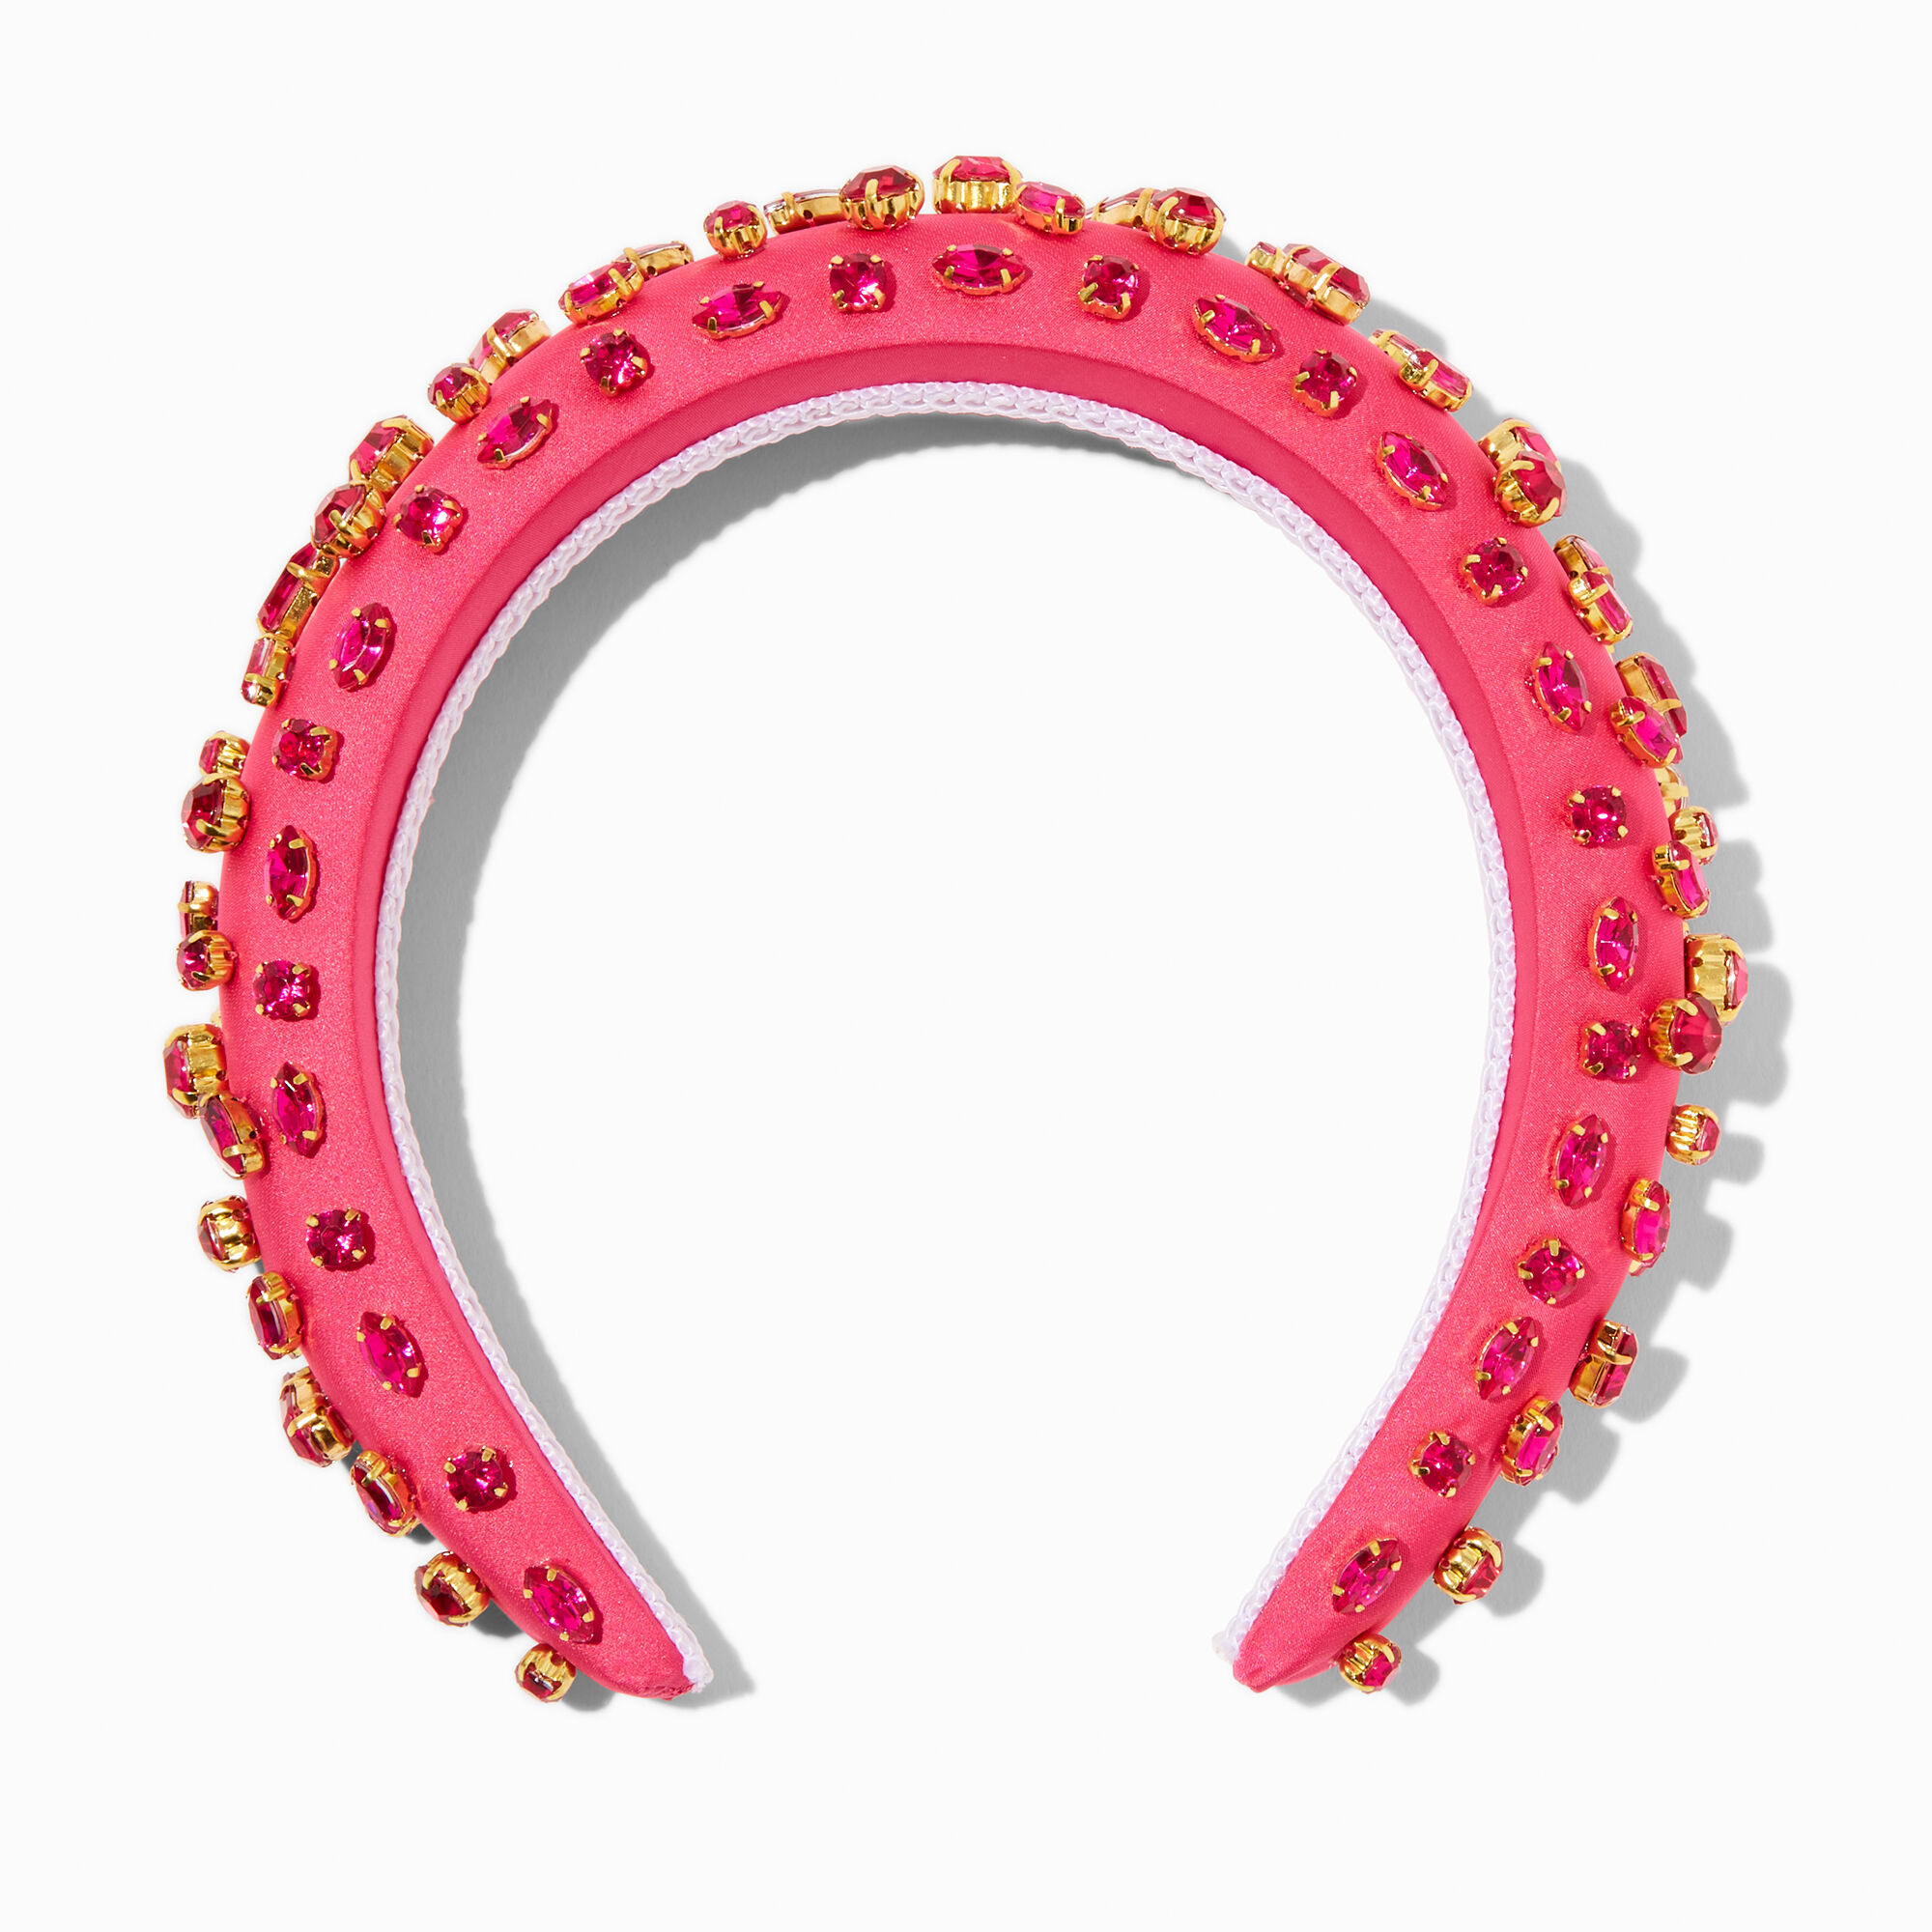 View Claires Gemstone Embellished Puffy Headband Pink information